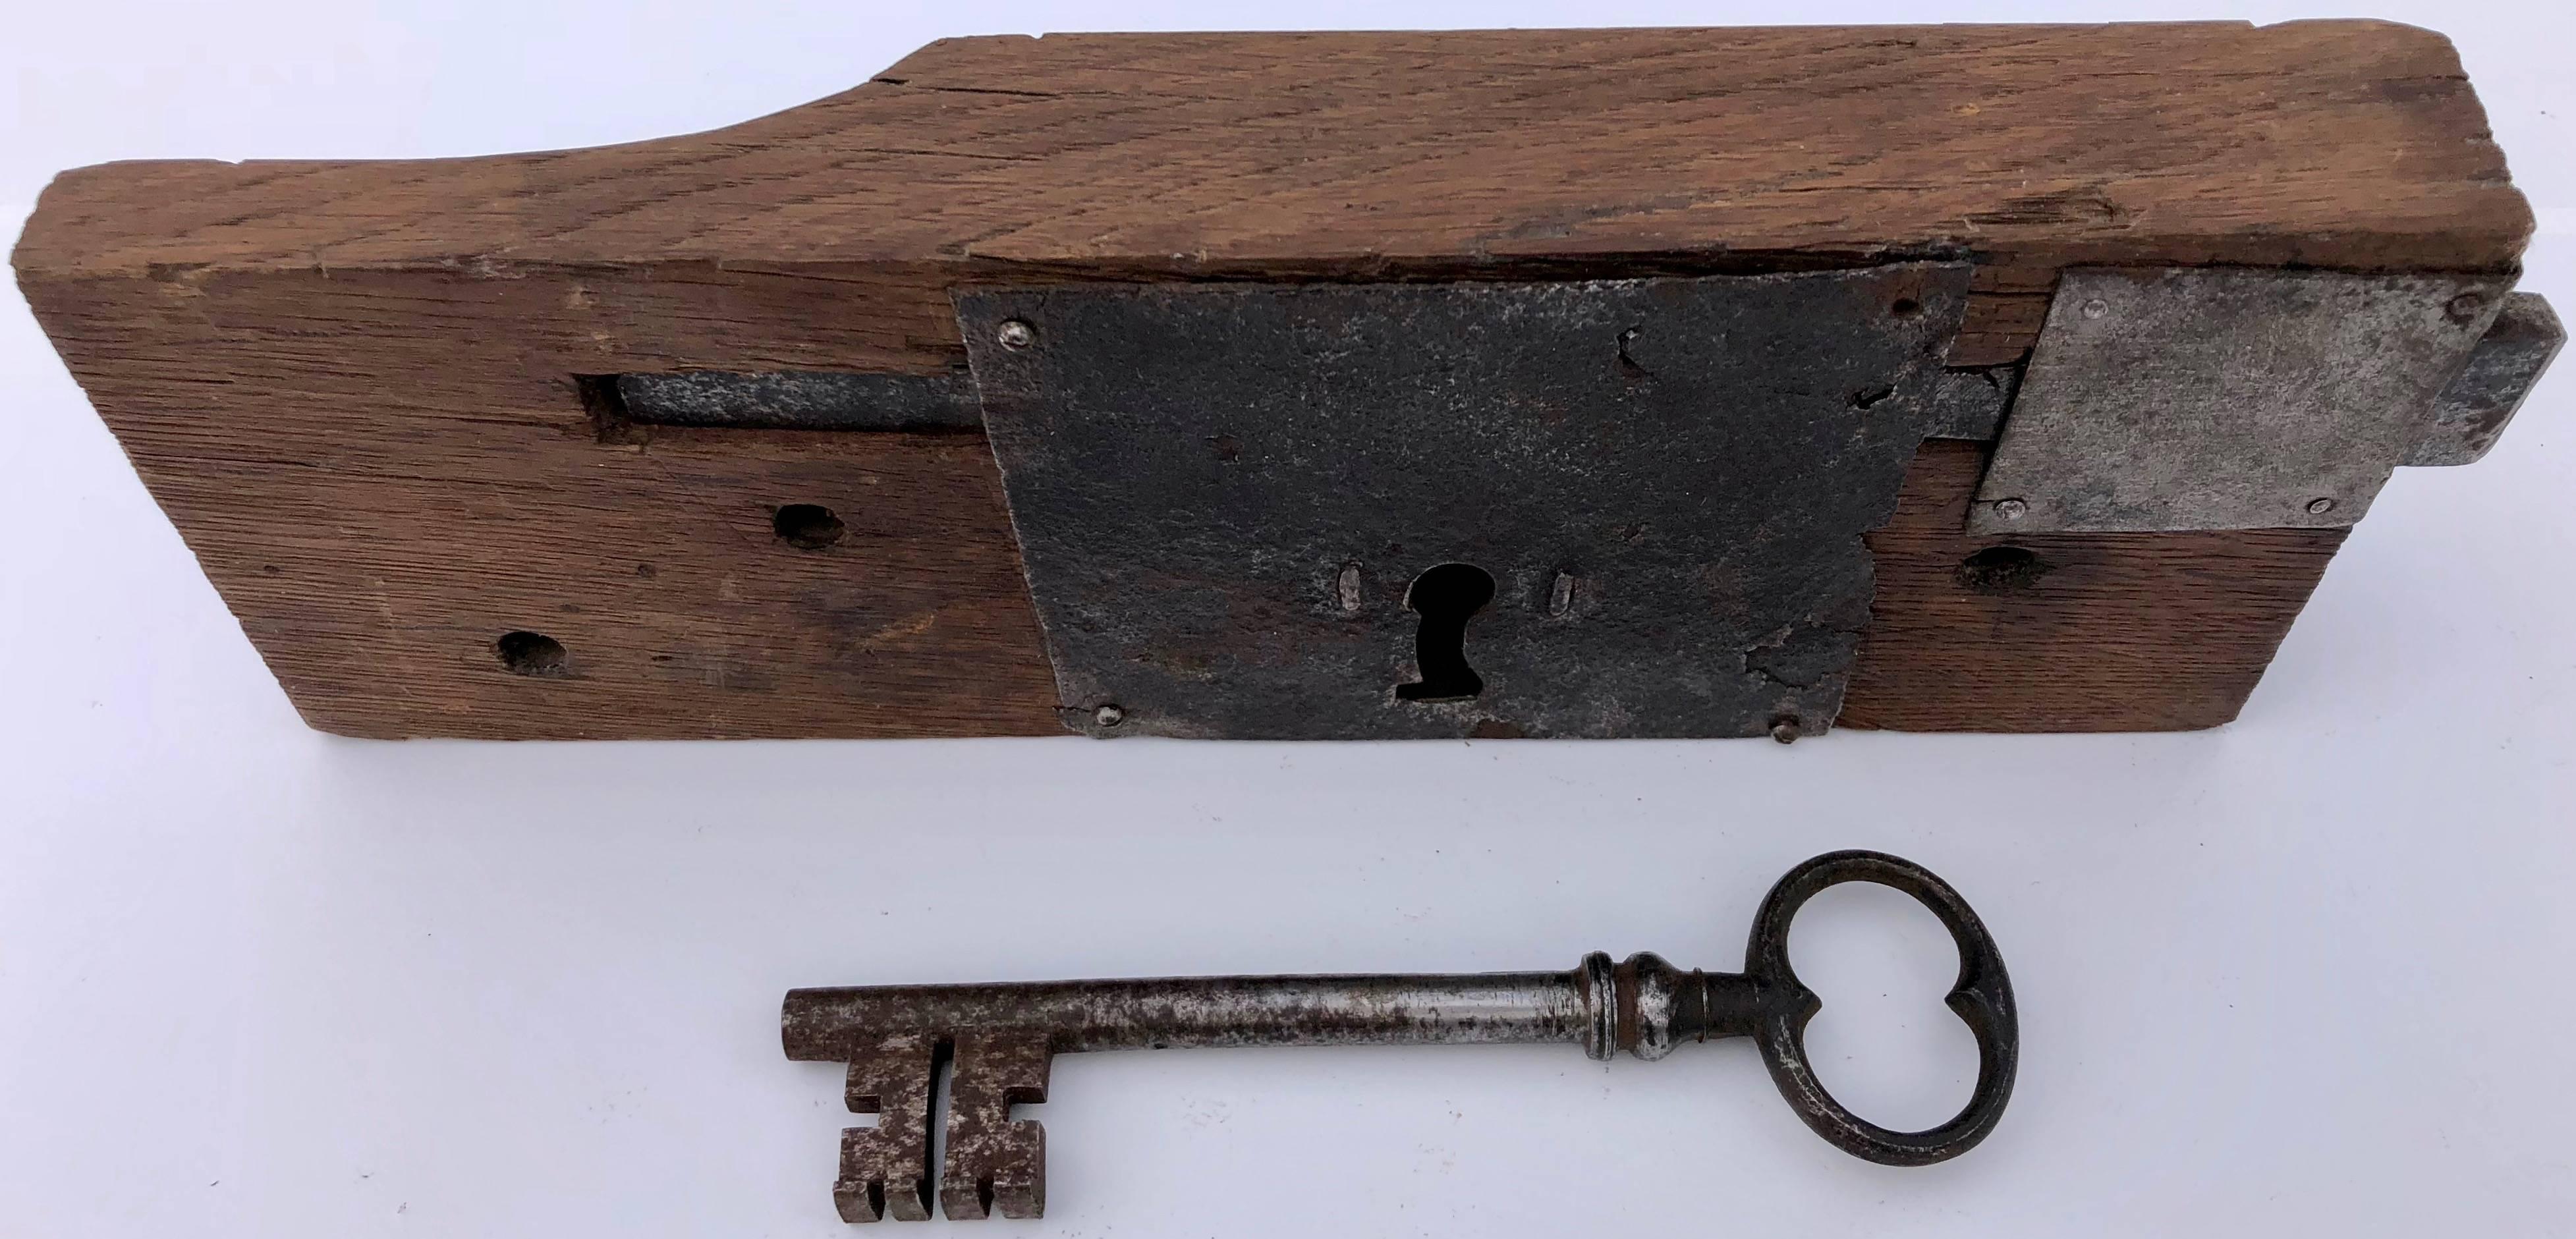 Other French Hand-Wrought Iron Mortise Mount Lock with Key on Wood Base, 1700s-1800s